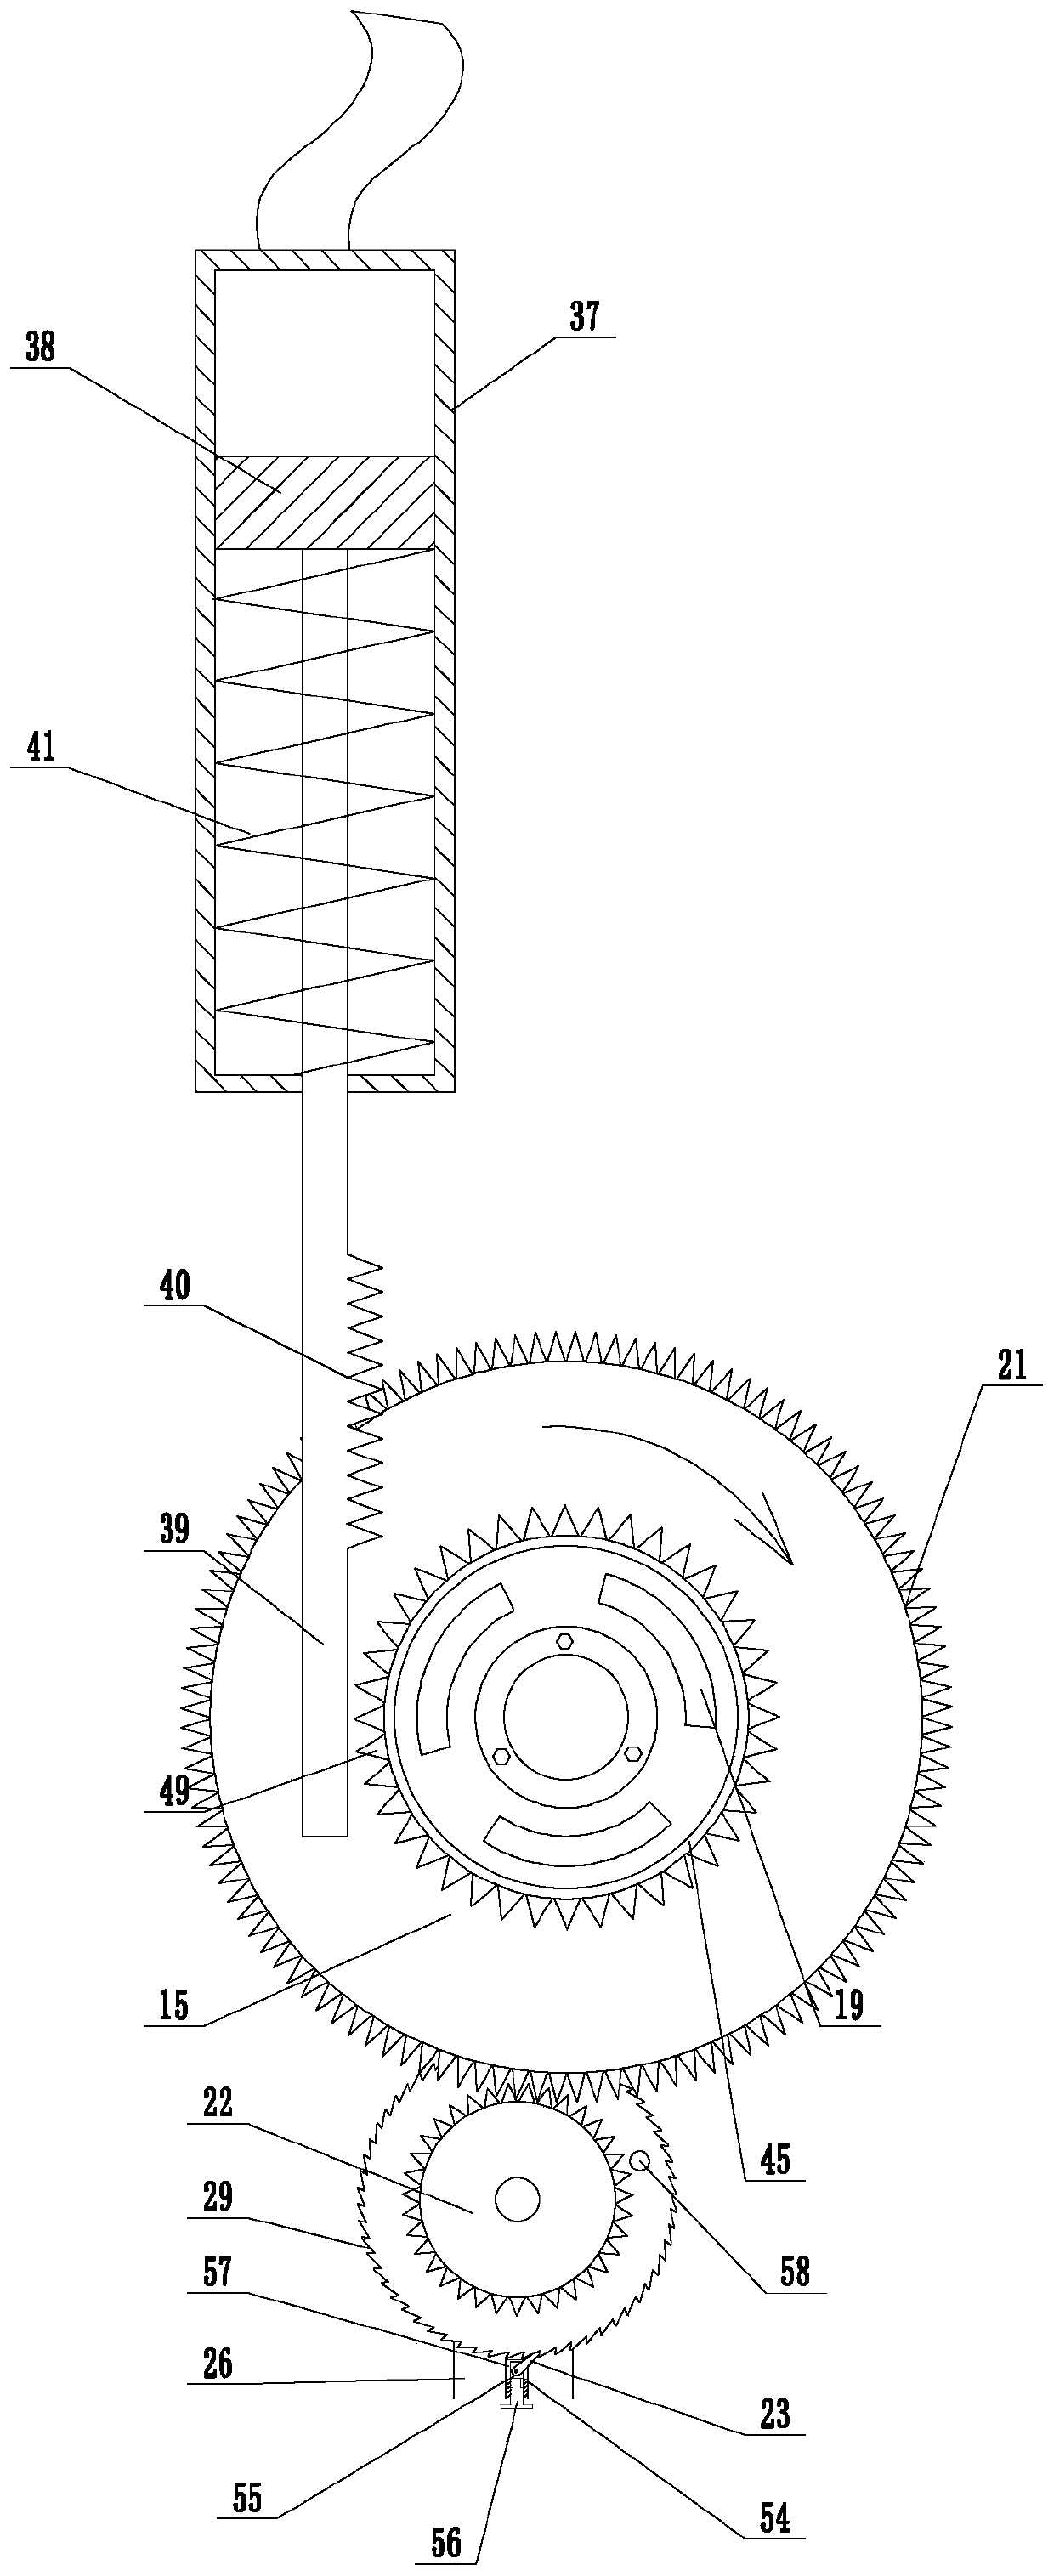 Steam and power dual-power-drive fan structure